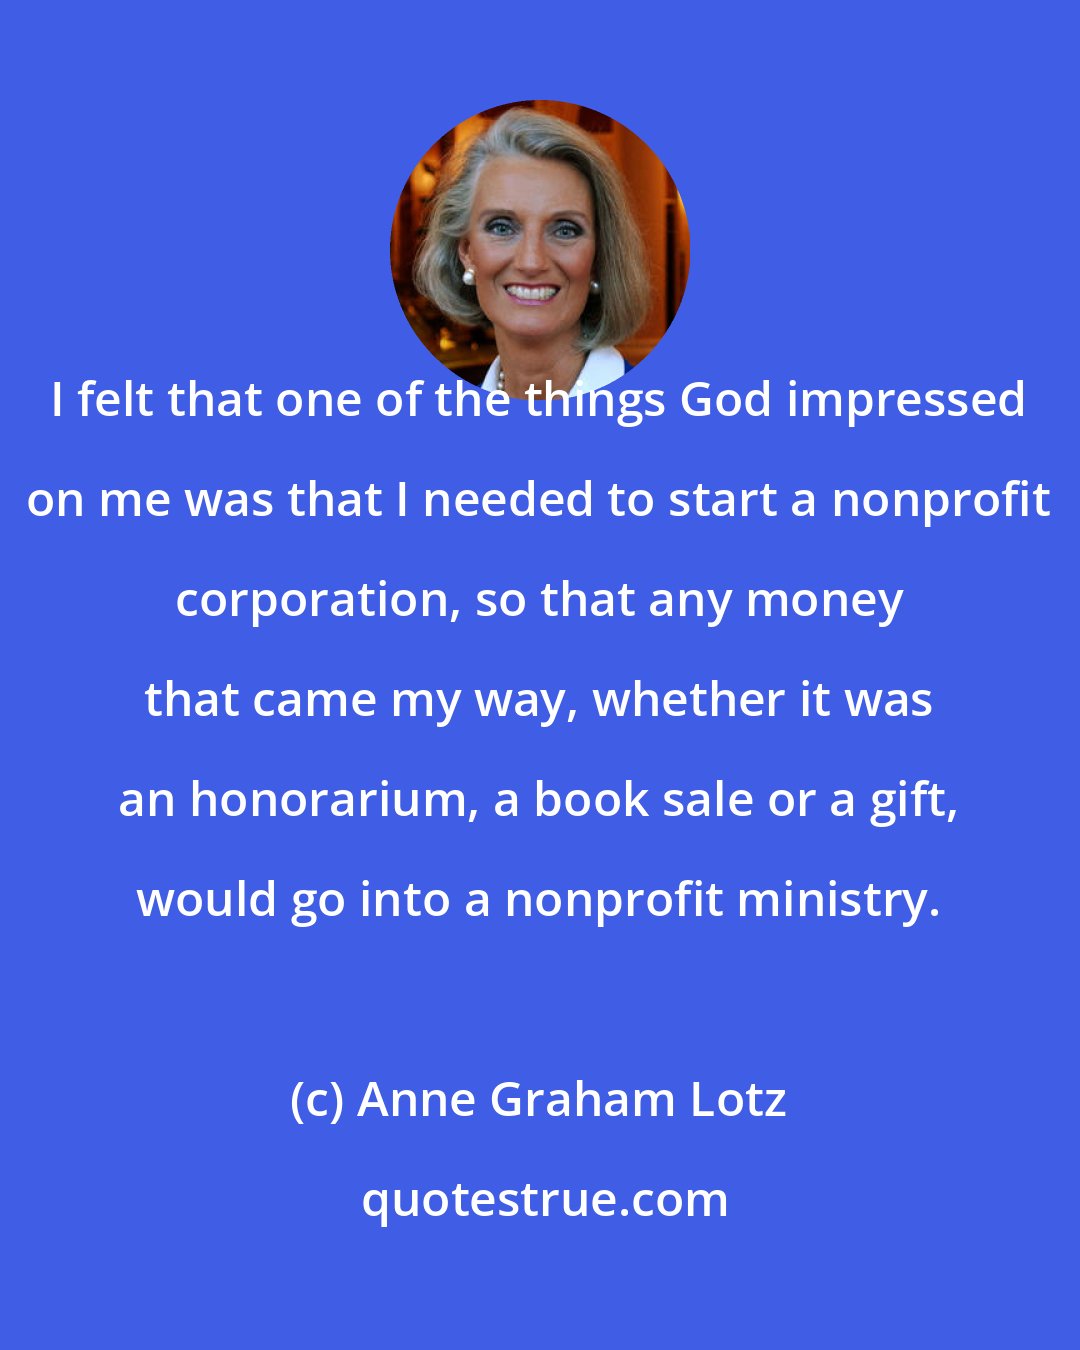 Anne Graham Lotz: I felt that one of the things God impressed on me was that I needed to start a nonprofit corporation, so that any money that came my way, whether it was an honorarium, a book sale or a gift, would go into a nonprofit ministry.